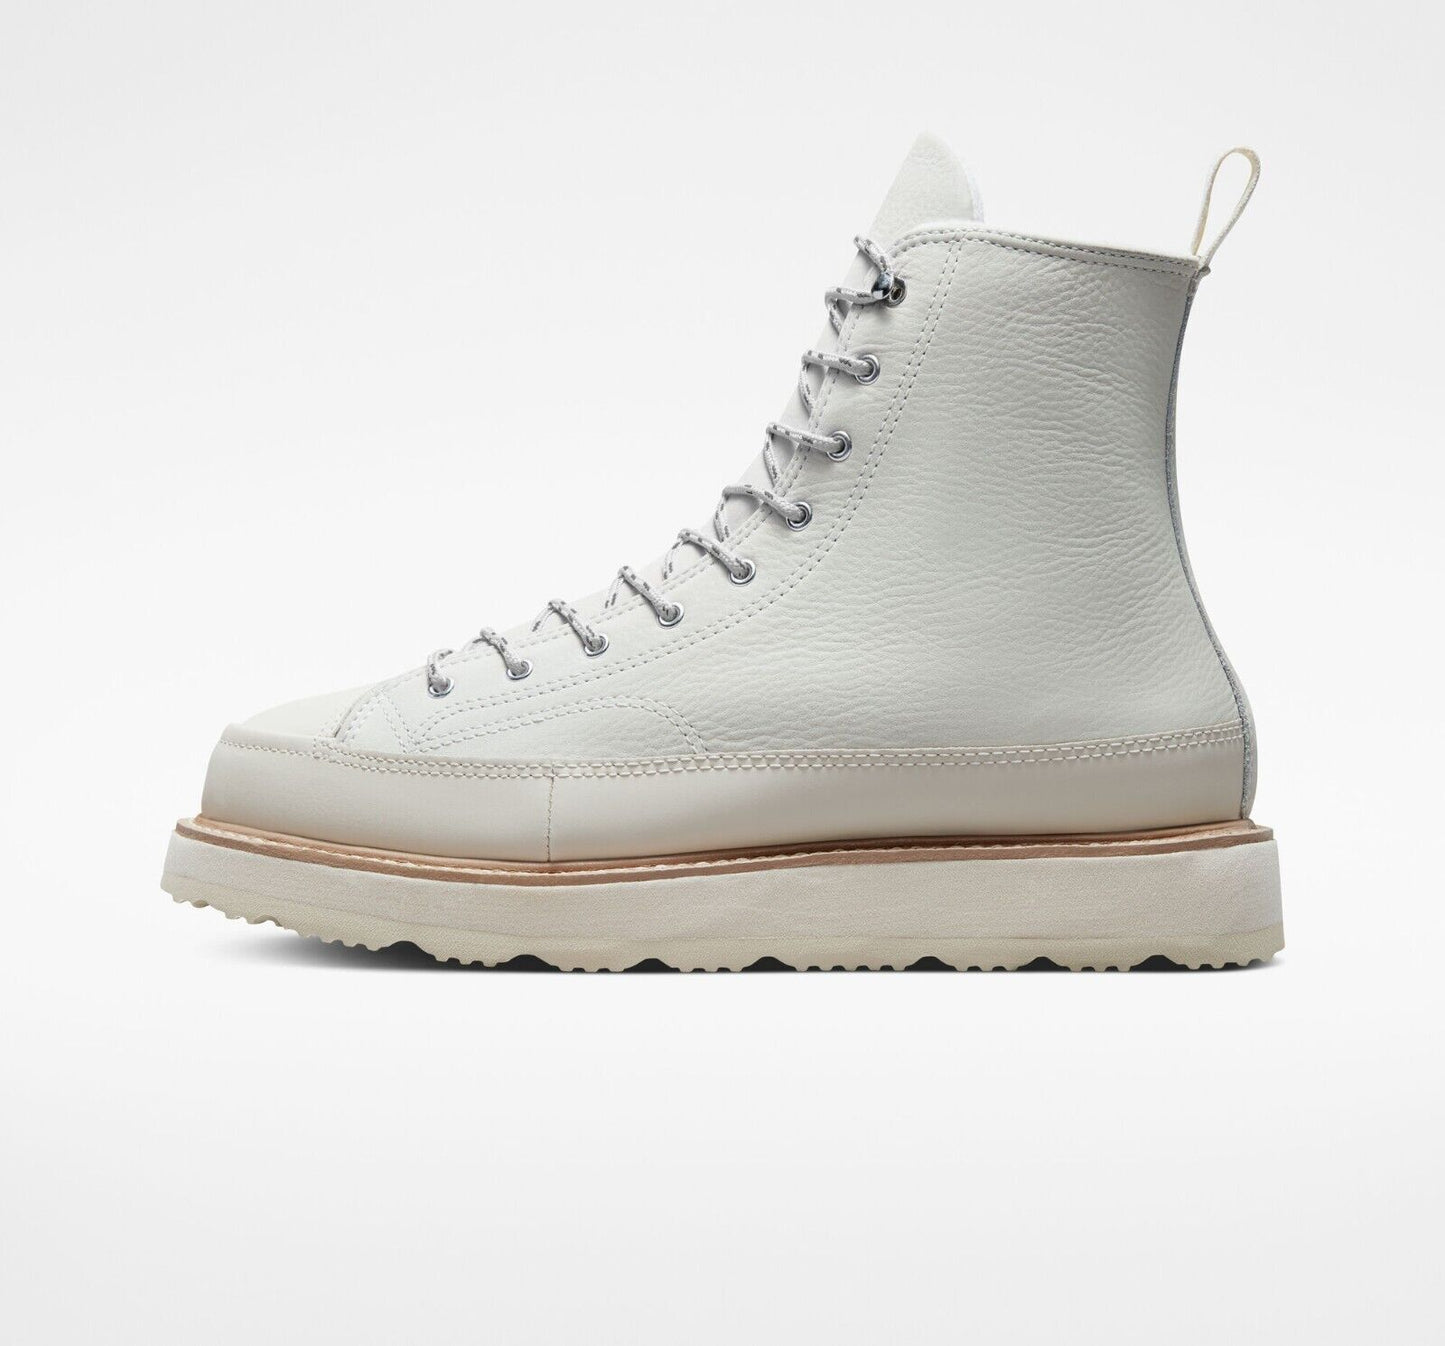 Converse Chuck Taylor Crafted Hi Top Boot, 173212C Multi Sizes Egret/Natural Ivory/Prime Pink